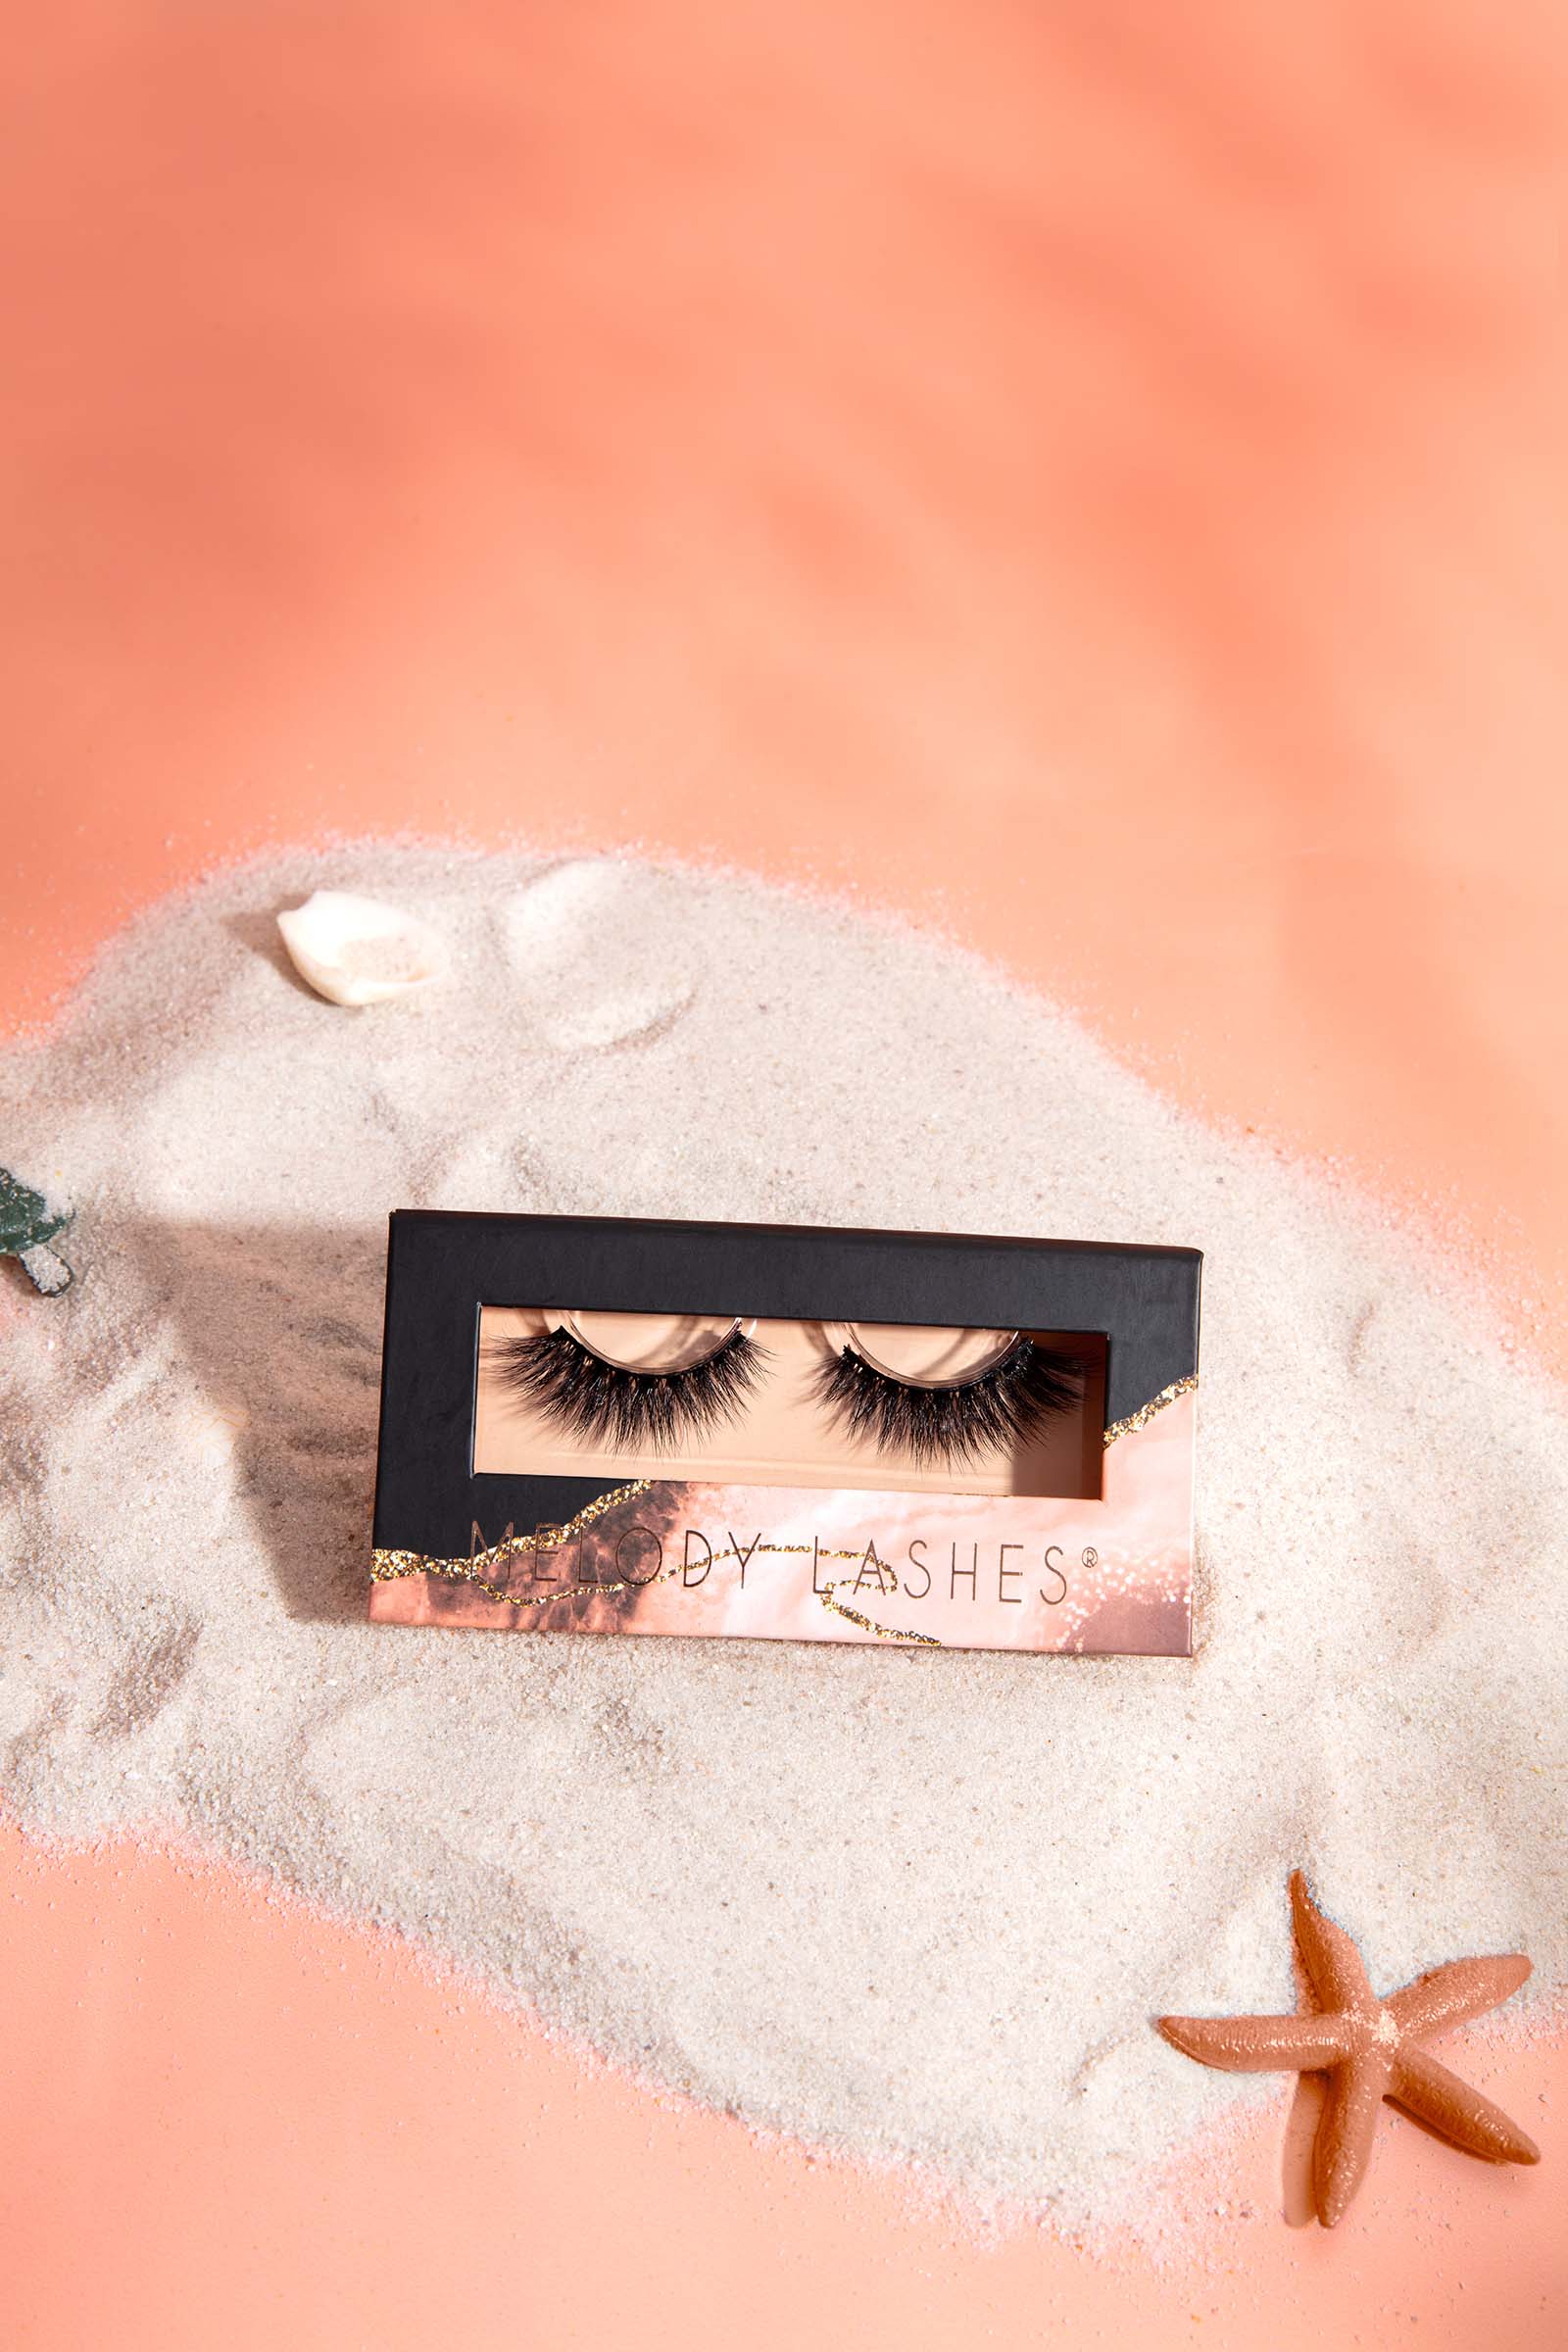 Minimal Product Photography for a False Lash Brand. Styled Product Stills by Colourpop Studio. Minimal Summer Styled Product Photos. Mini Beach styled Photo.